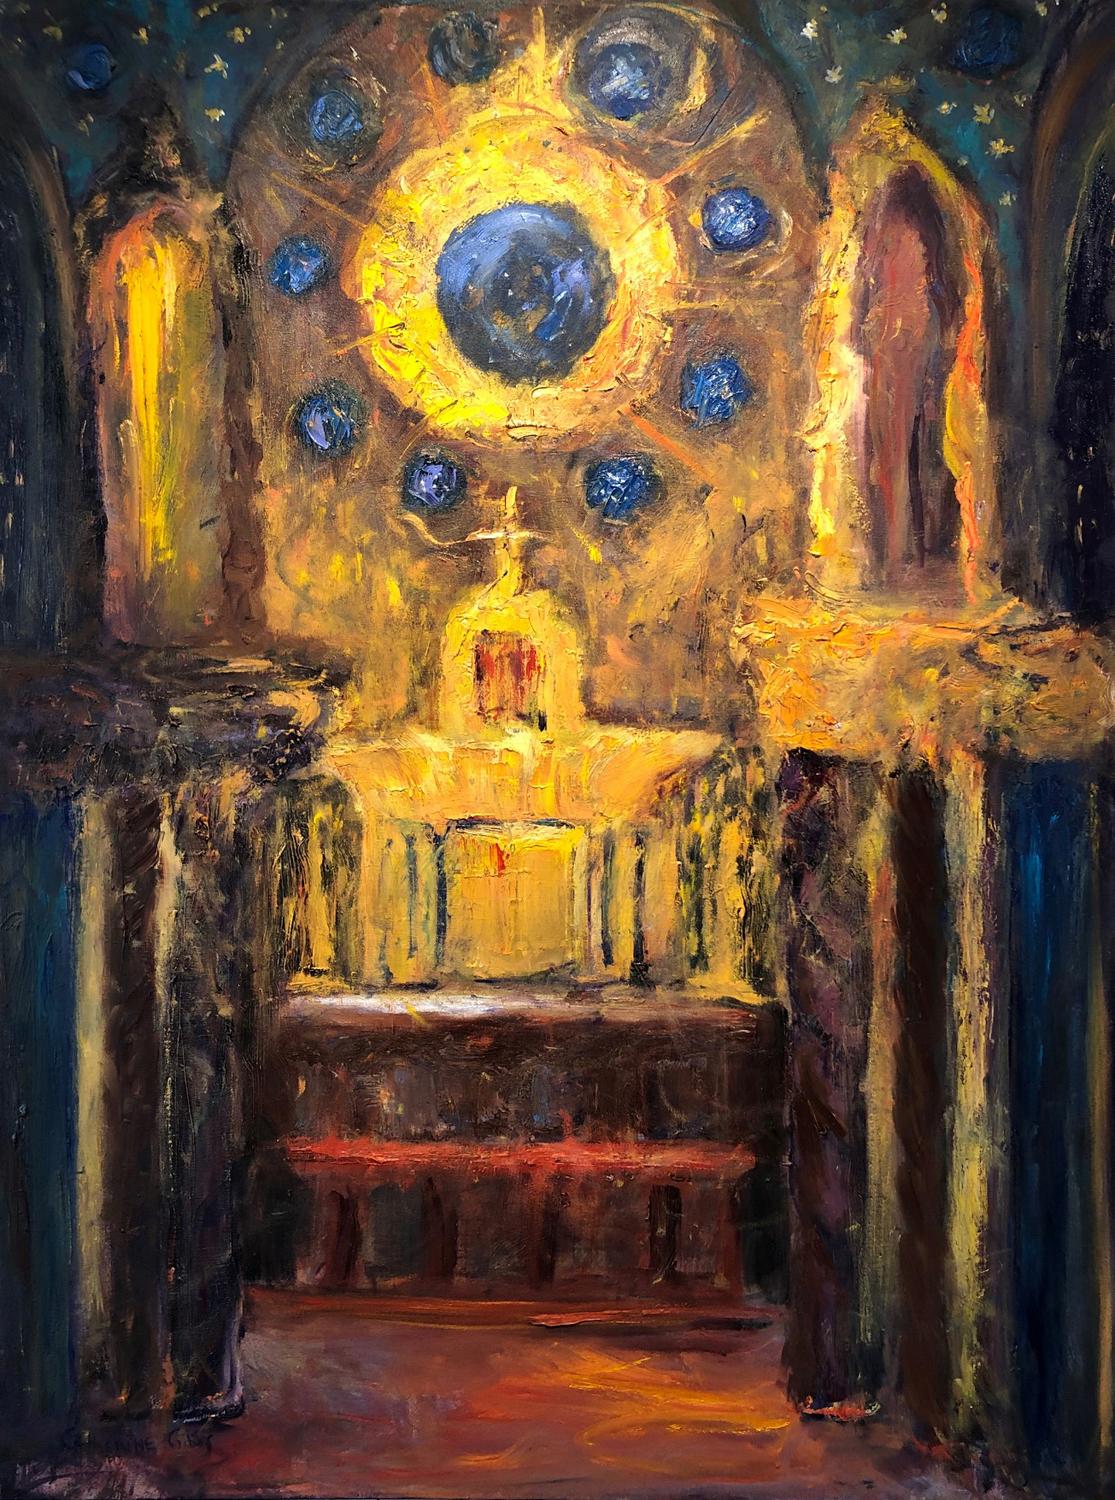 "Altar with Celestial Blue and Gold", expressionist, textural, oil painting